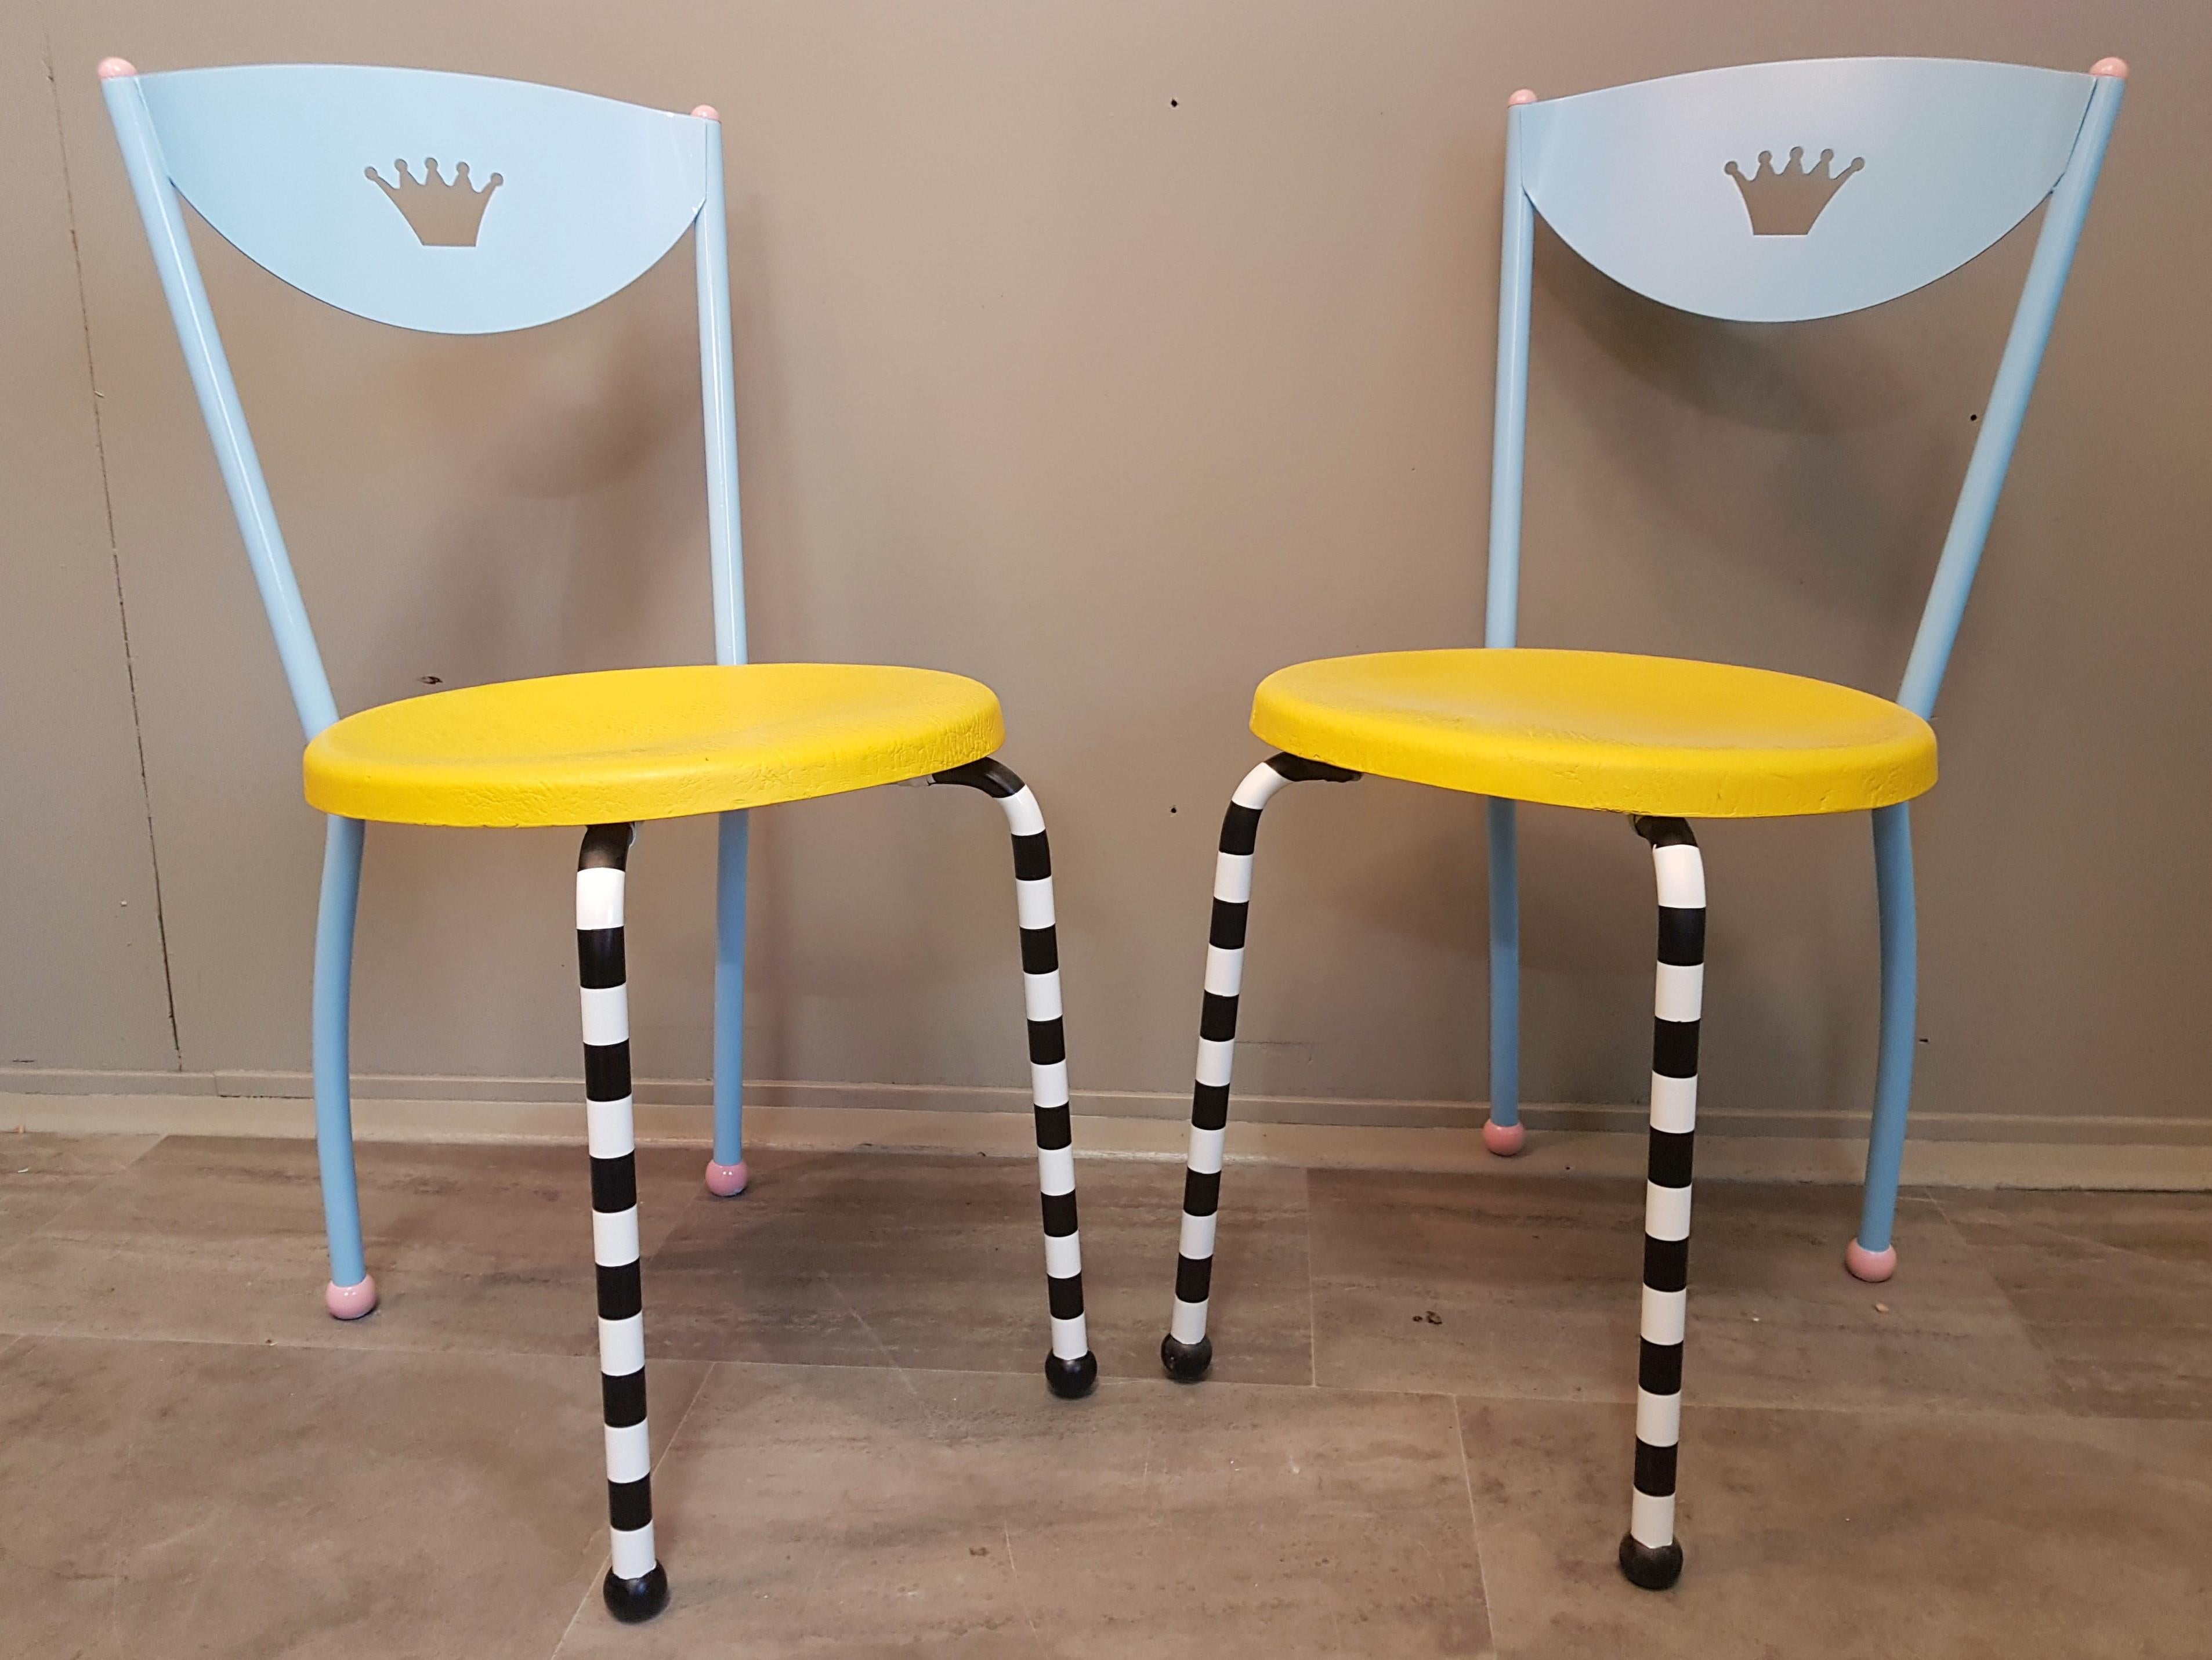 8 Memphis Postmodern Dining Chairs Manner of Michele De Lucci, Italy, 1980s For Sale 8